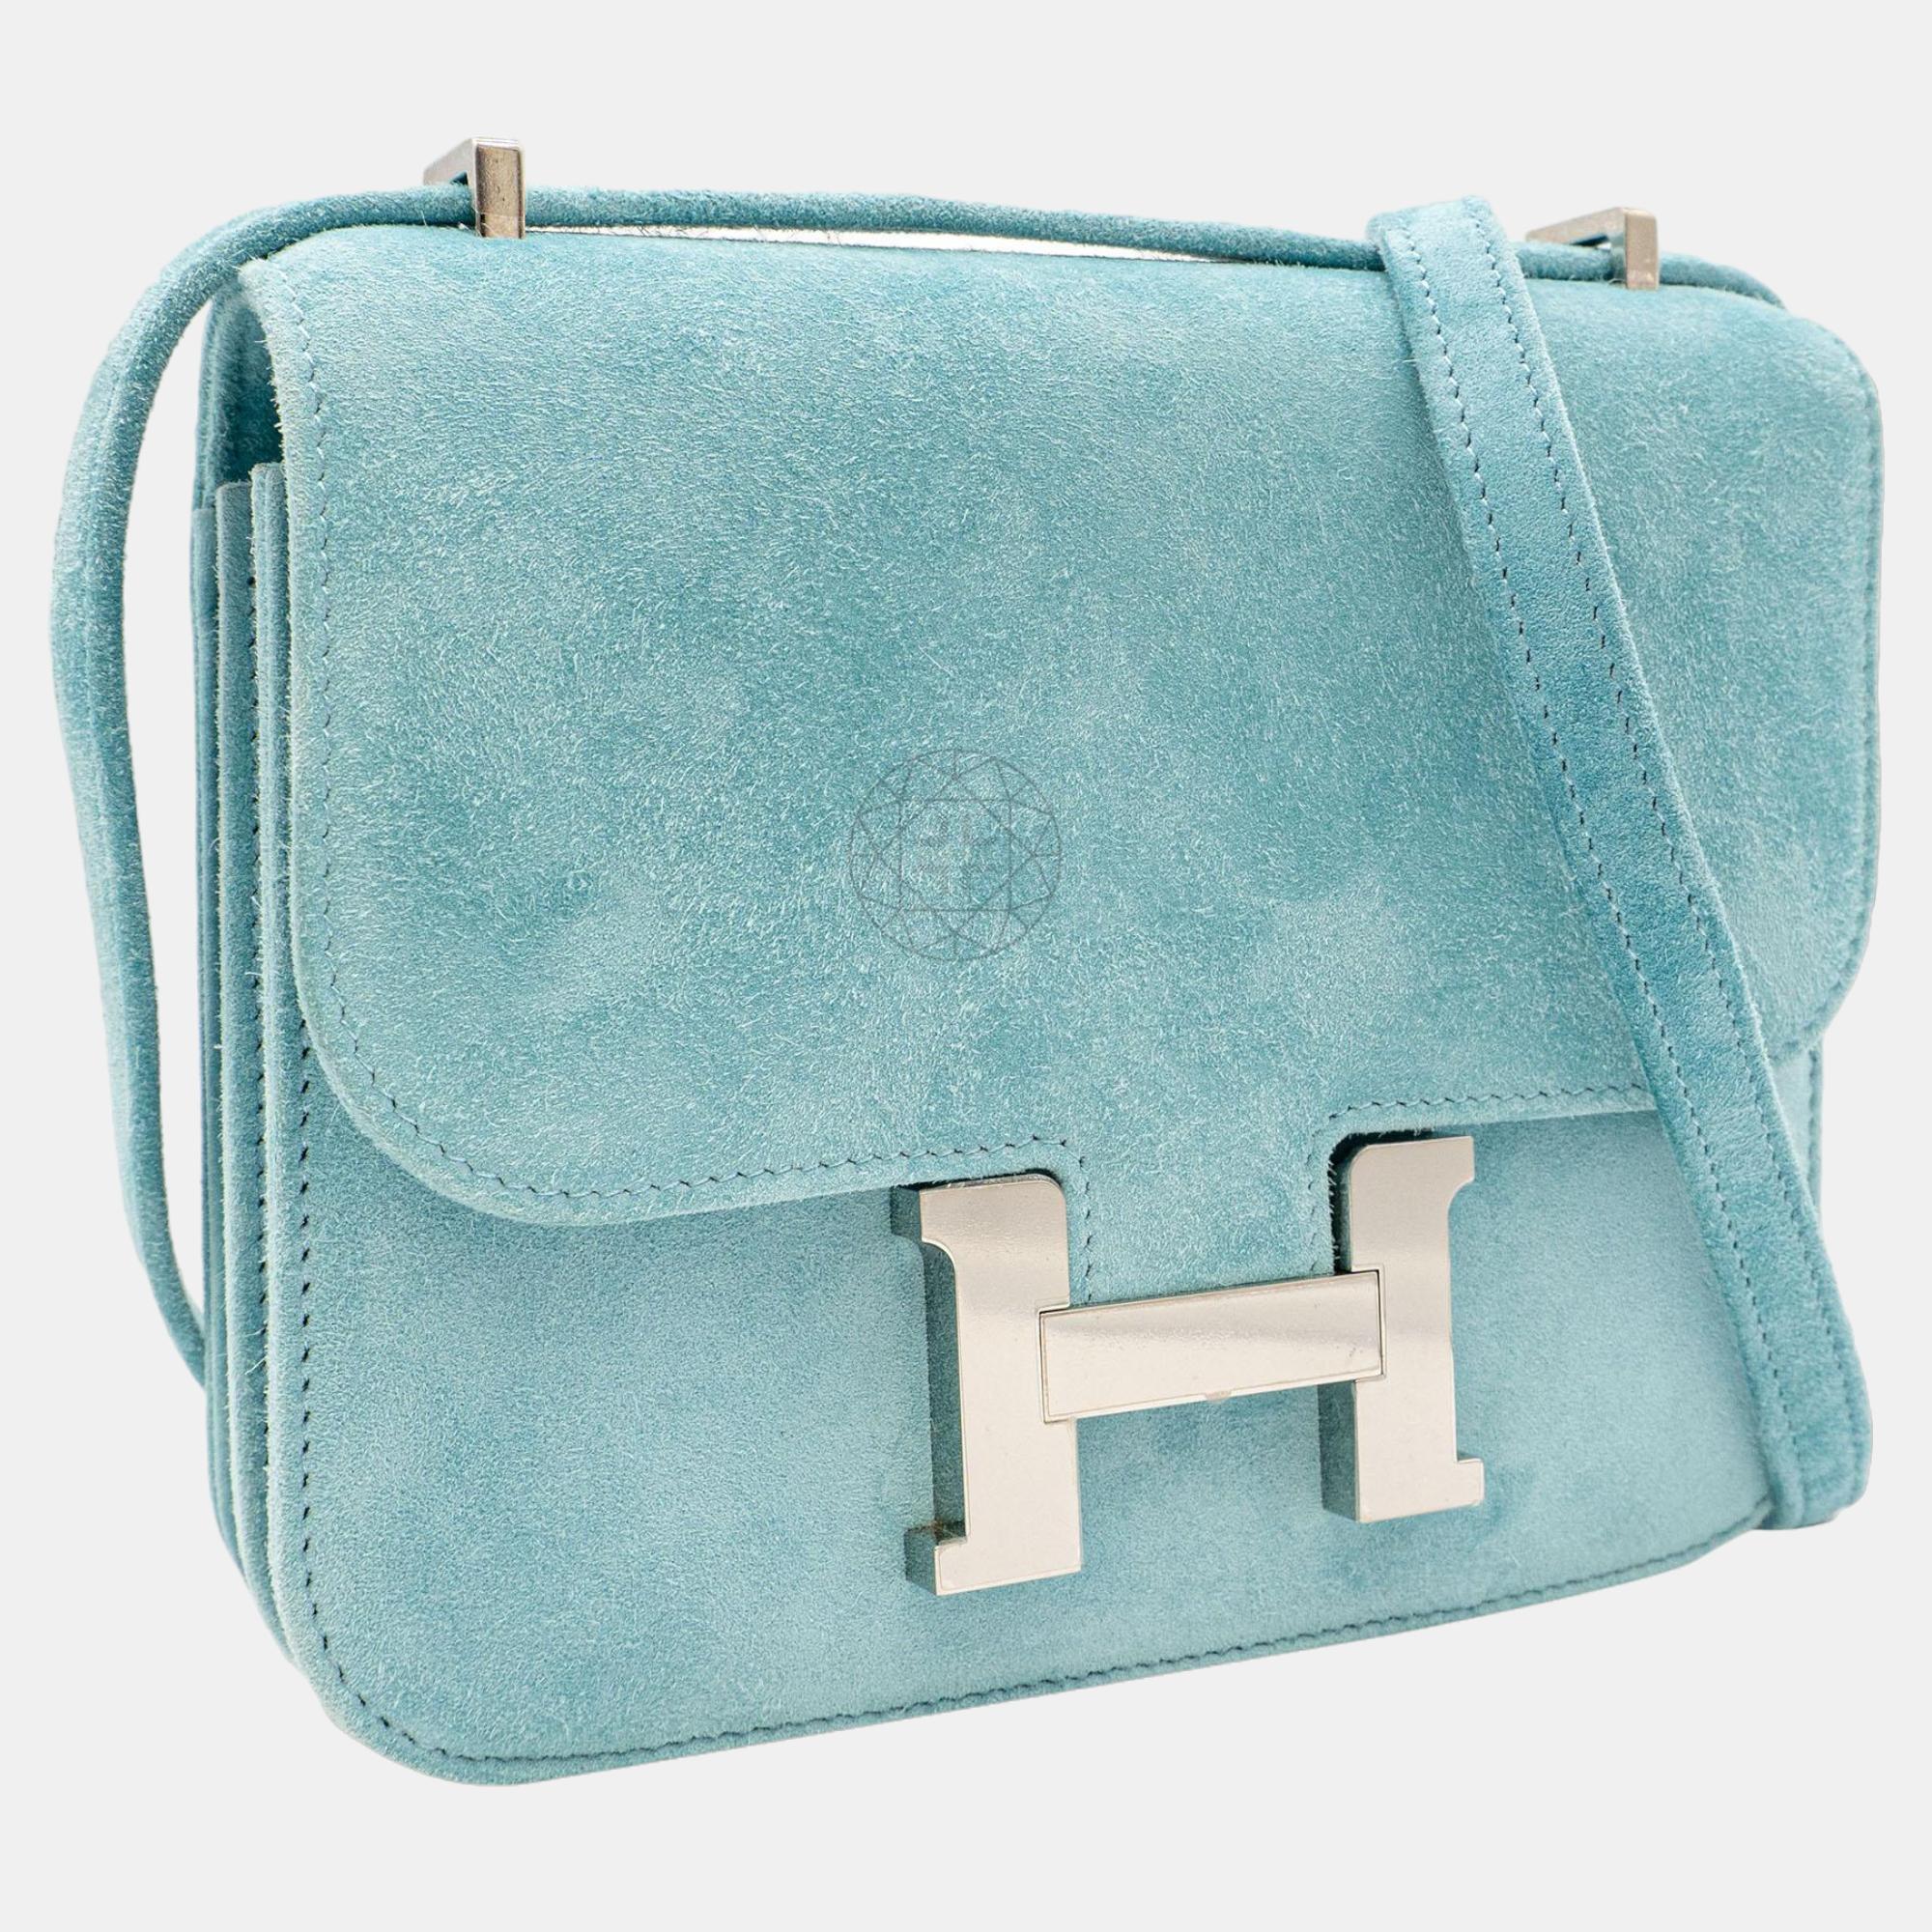 Hermès Doblis Constance 18 In Bleu Atoll With PHW Bag